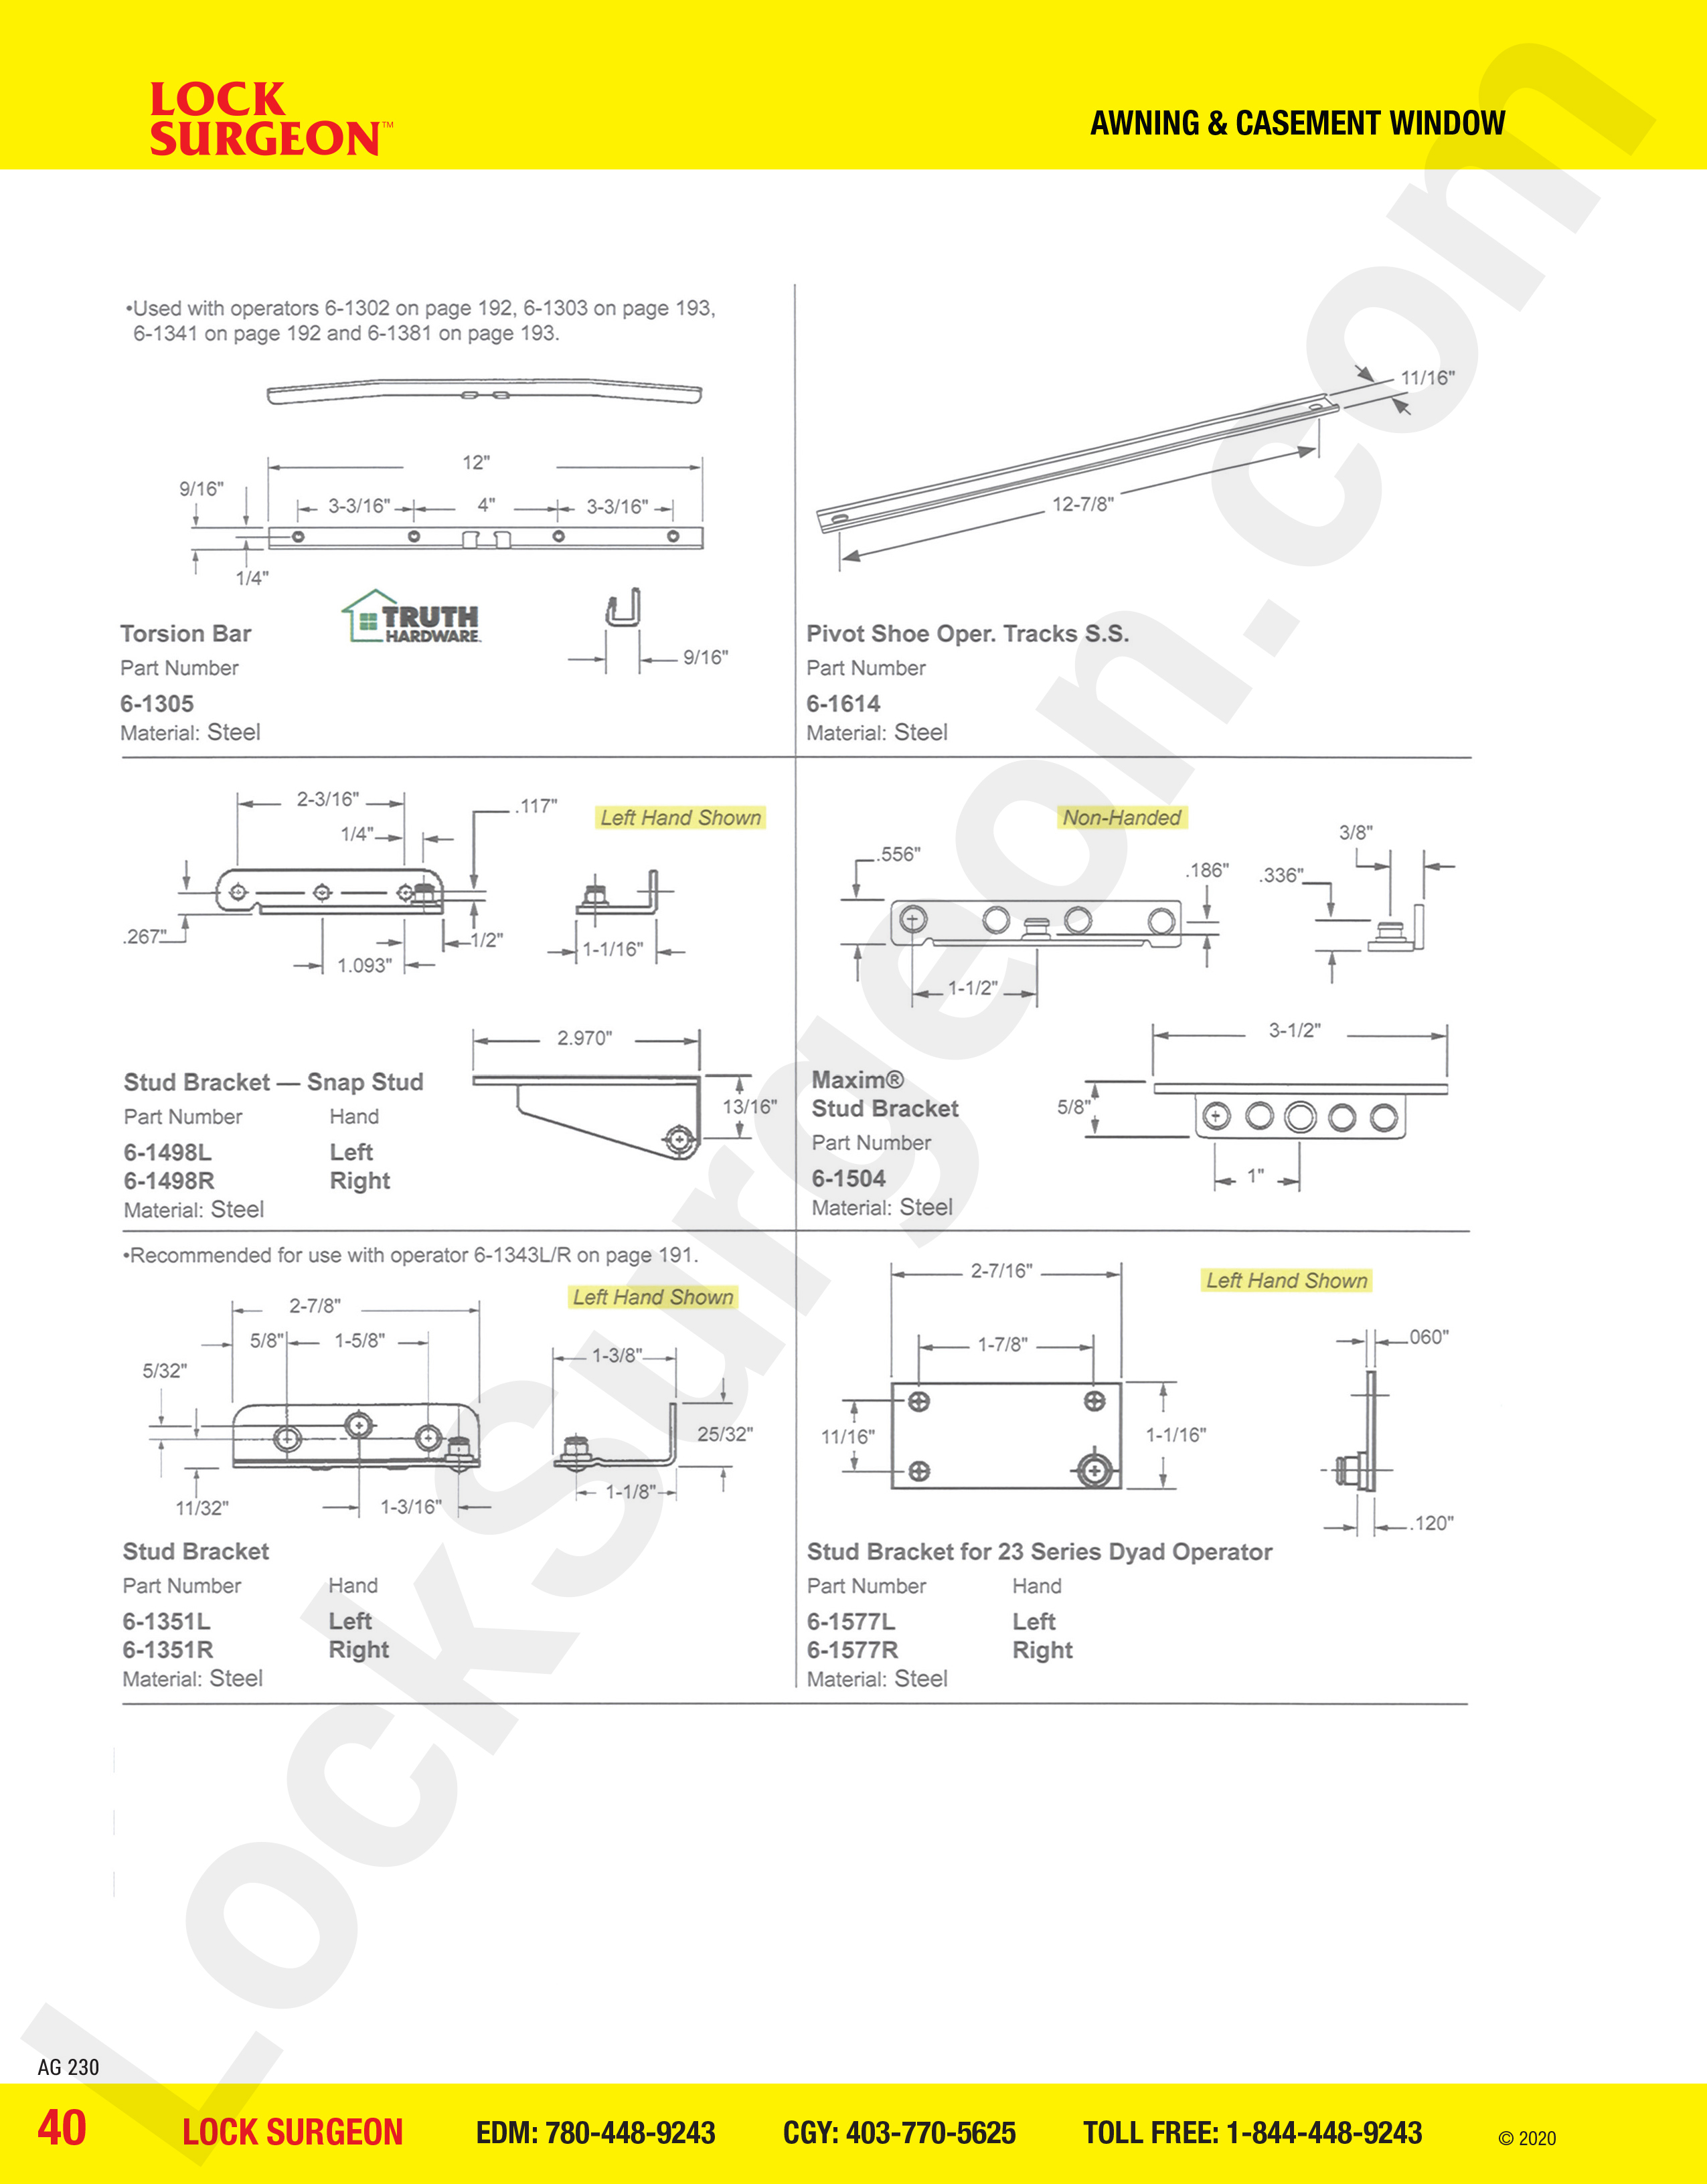 awning and casement window parts for stud brackets Acheson mobile